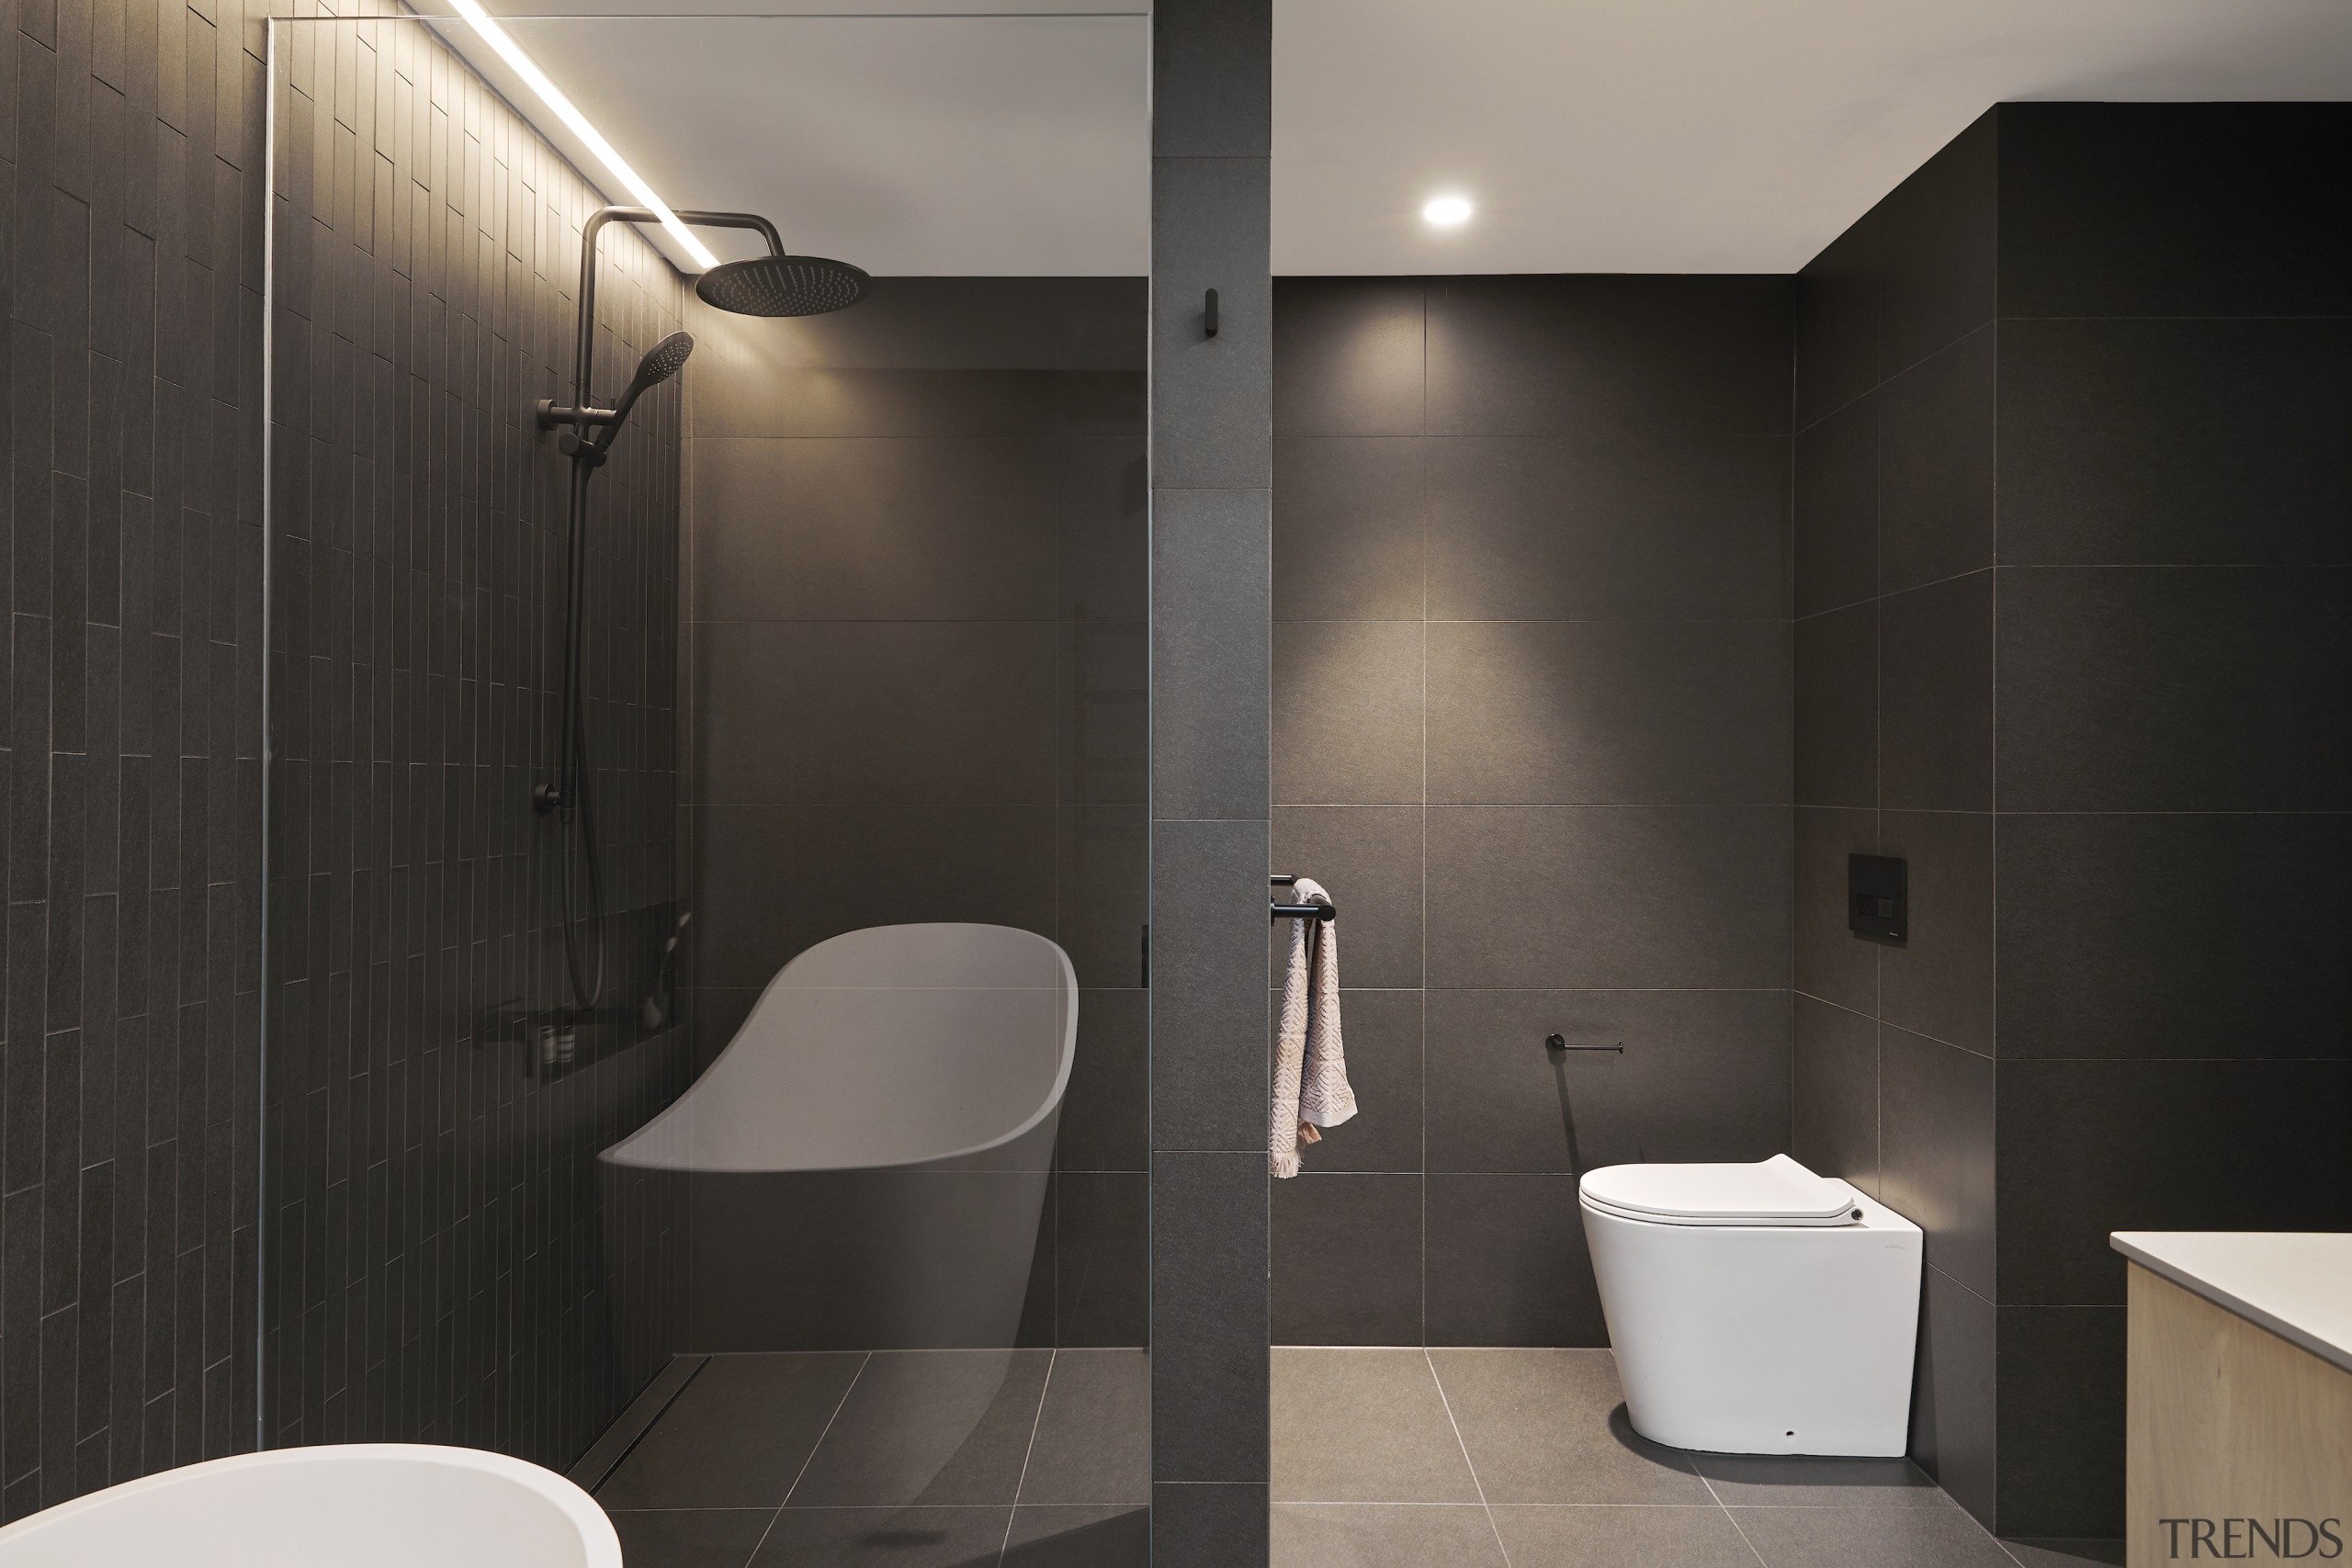 The glass panelling between the shower and bath space 